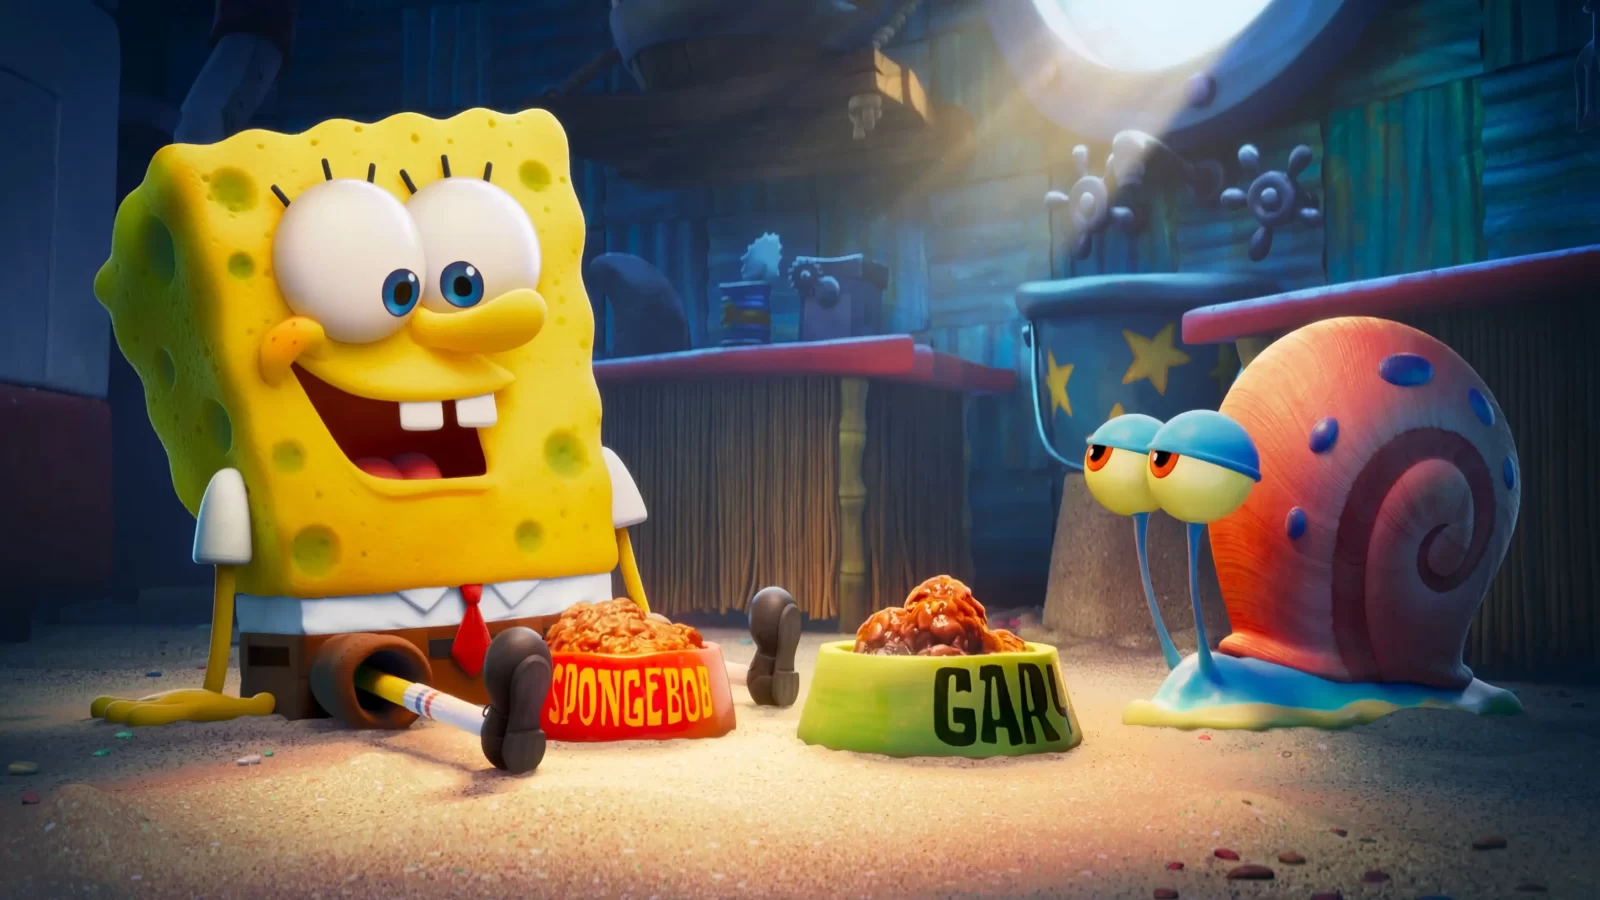 Which SpongeBob Character Are You? Quiz SpongeBob SquarePants and Gary the Snail